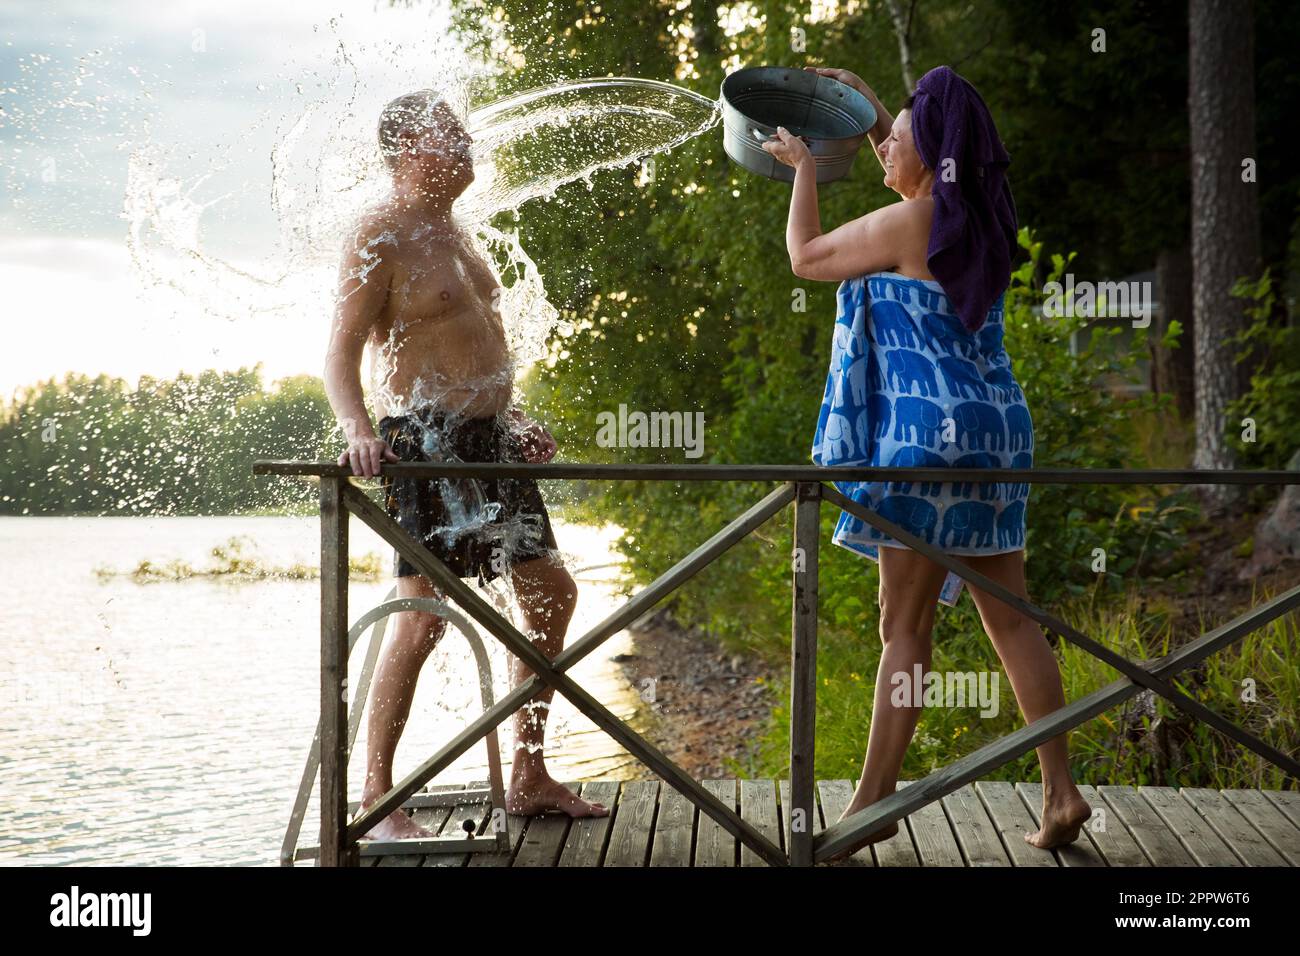 Aged couple having fun after Finnish sauna on wooden cottage pier in a lake. Mature woman pouring cold water from basin over her partner. Finland Stock Photo